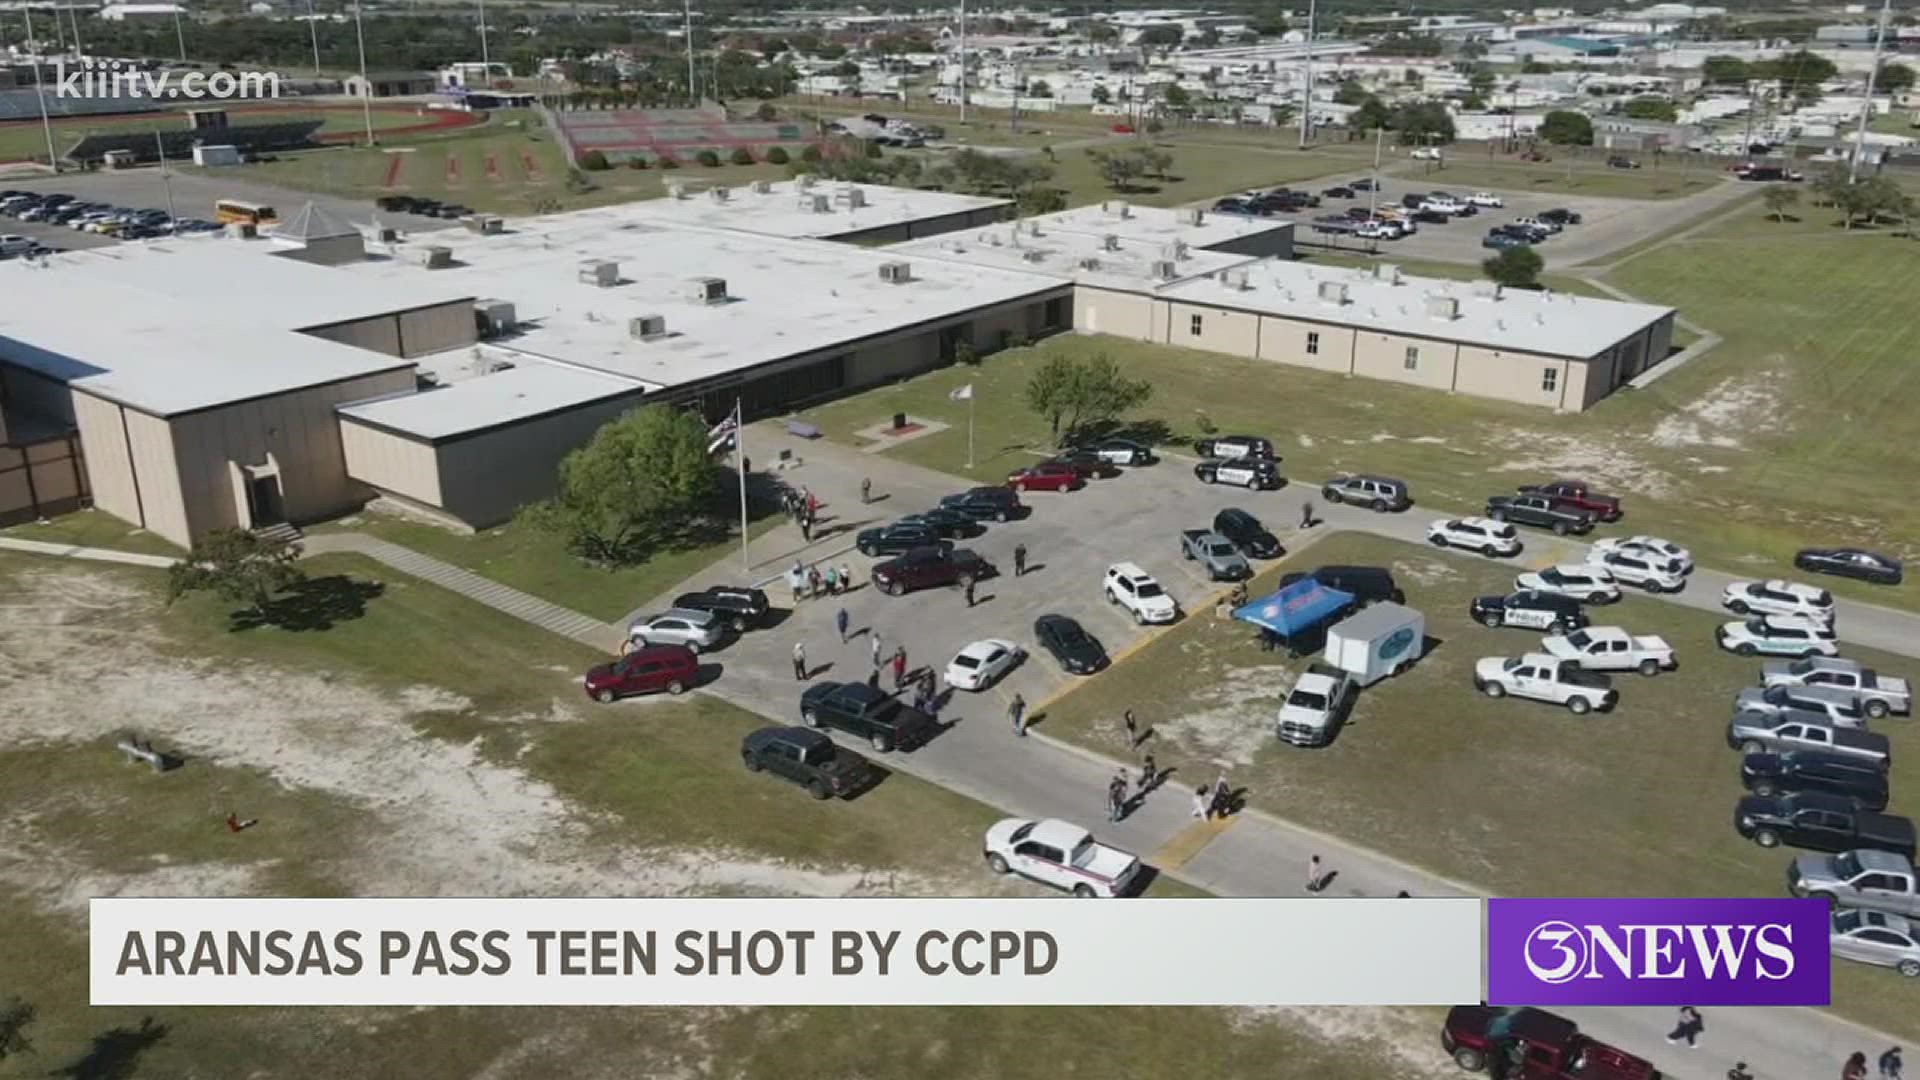 Police confirmed Wednesday that the person who was shot by Corpus Christi police after fleeing a hit-and-run crash was the Aransas Pass ISD threat suspect.